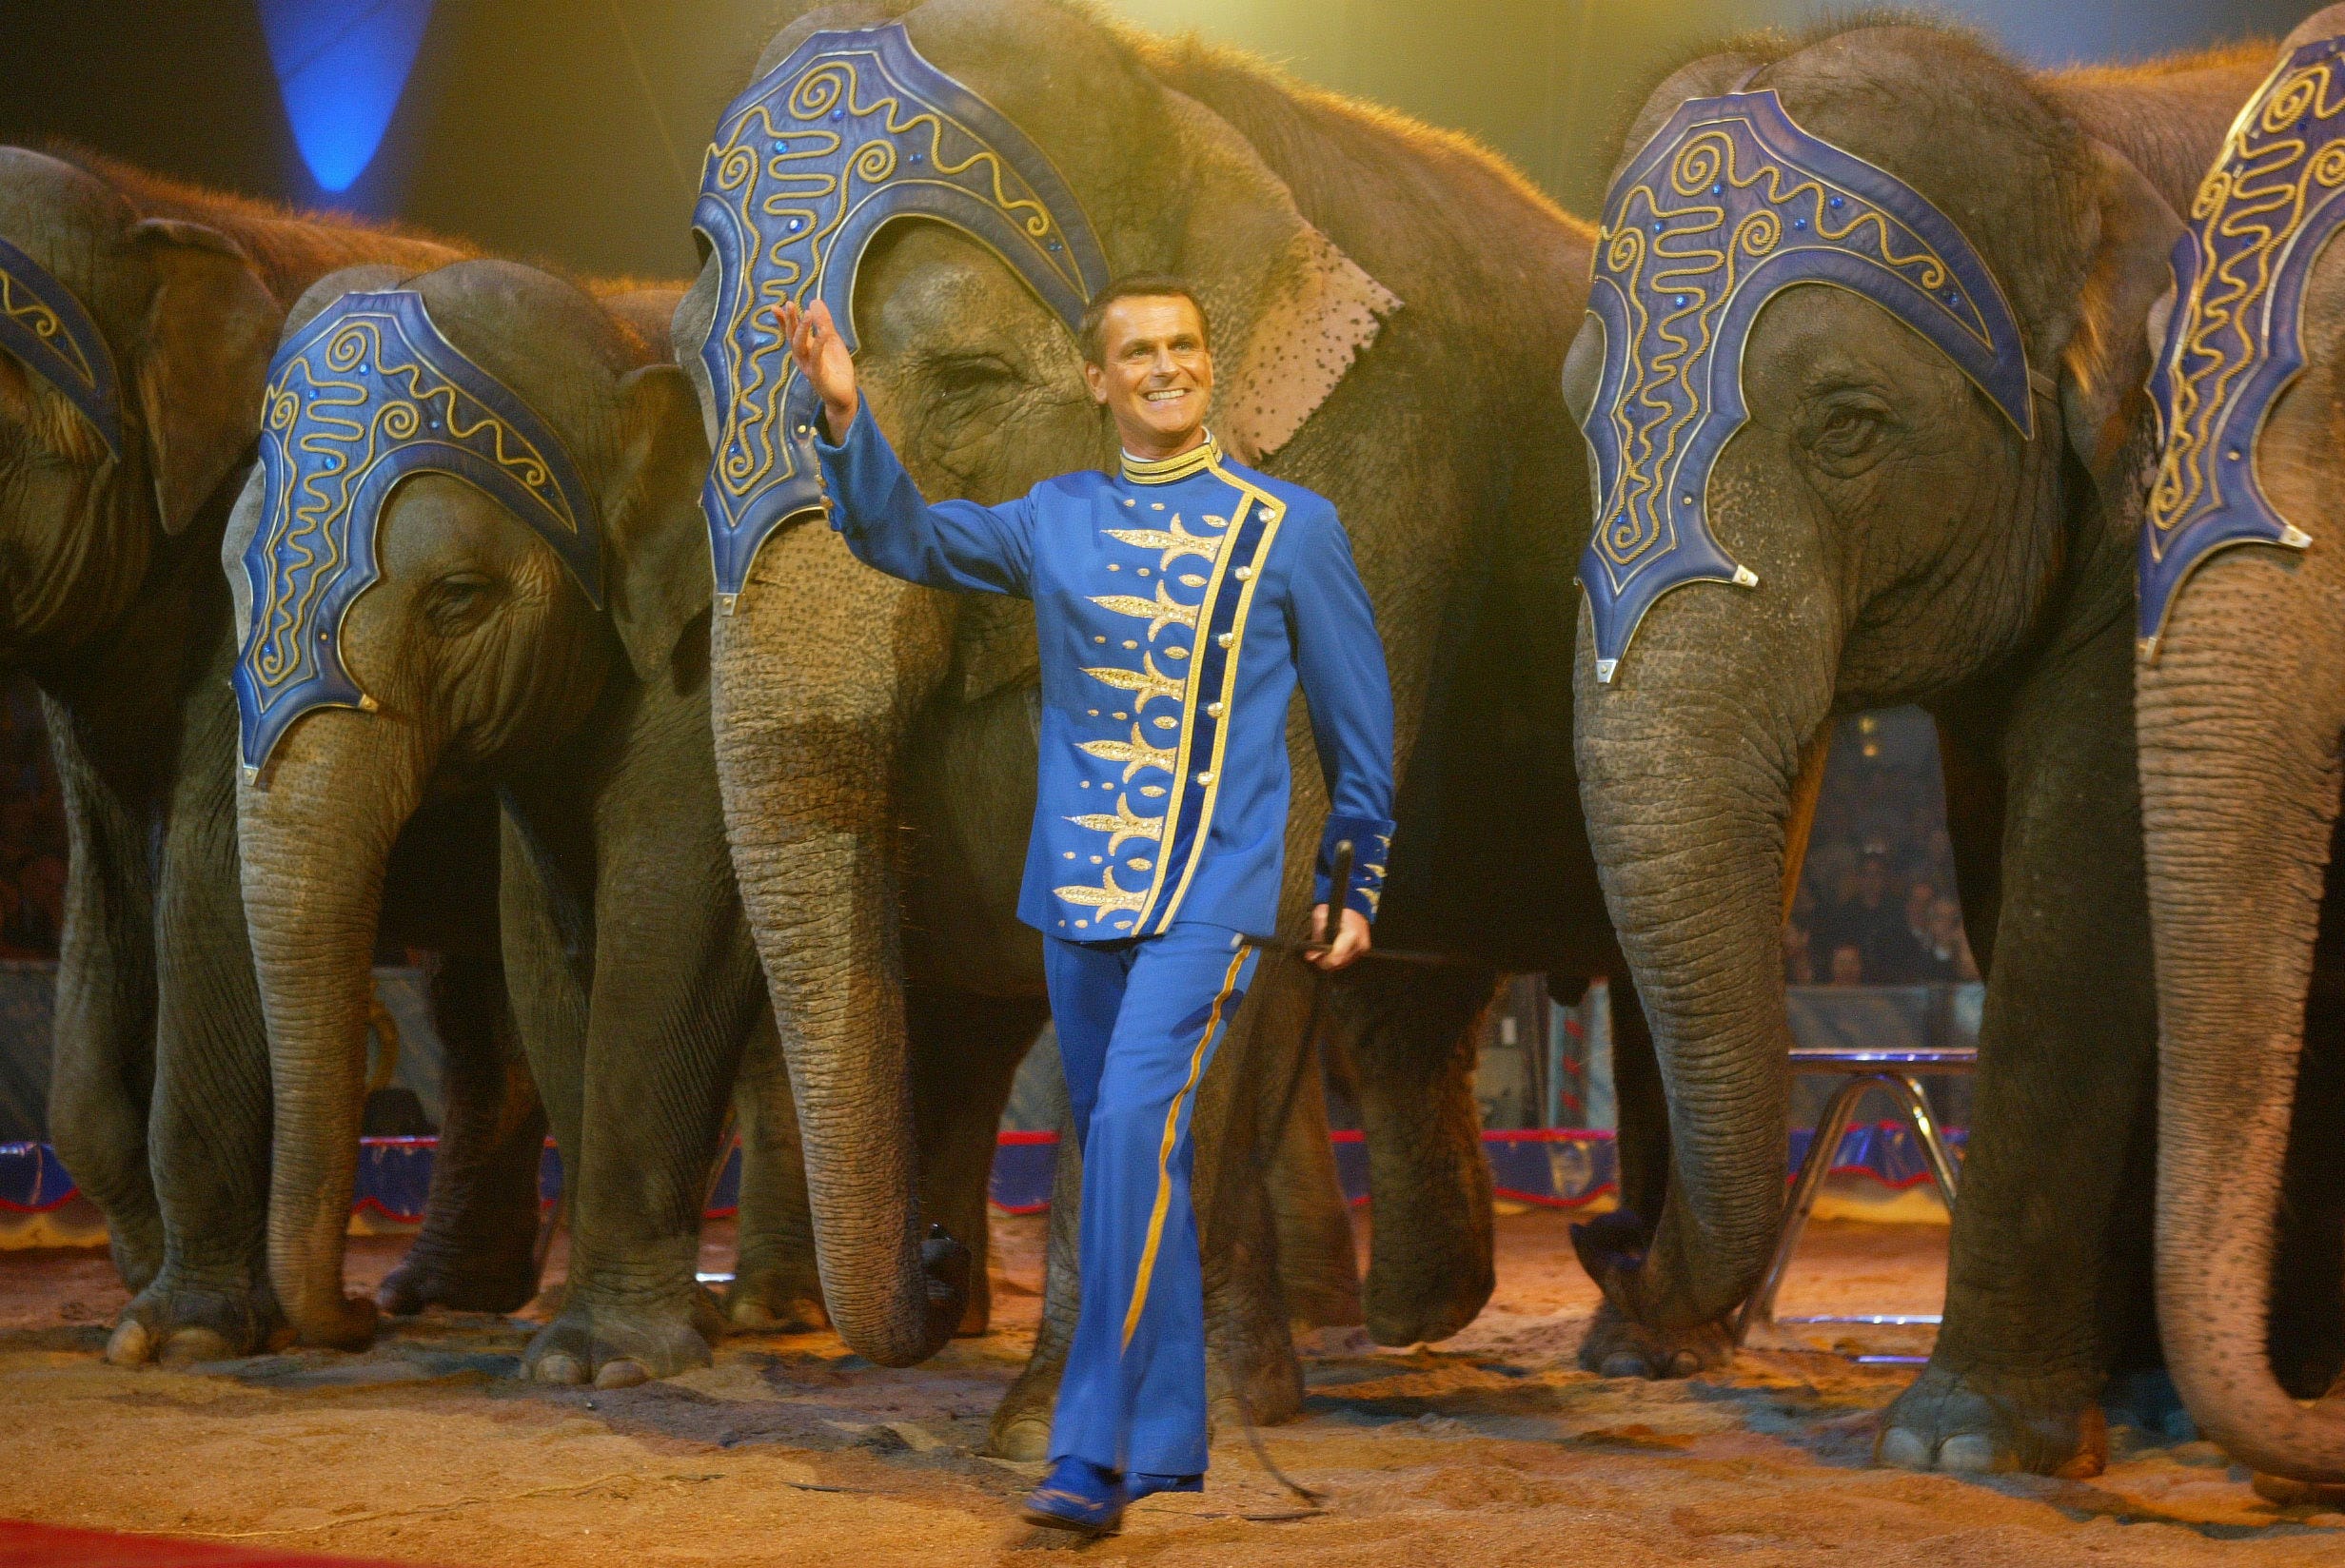 Franco Knie, a Swiss circus ringmaster, pictured in costume in front of performing elephants.